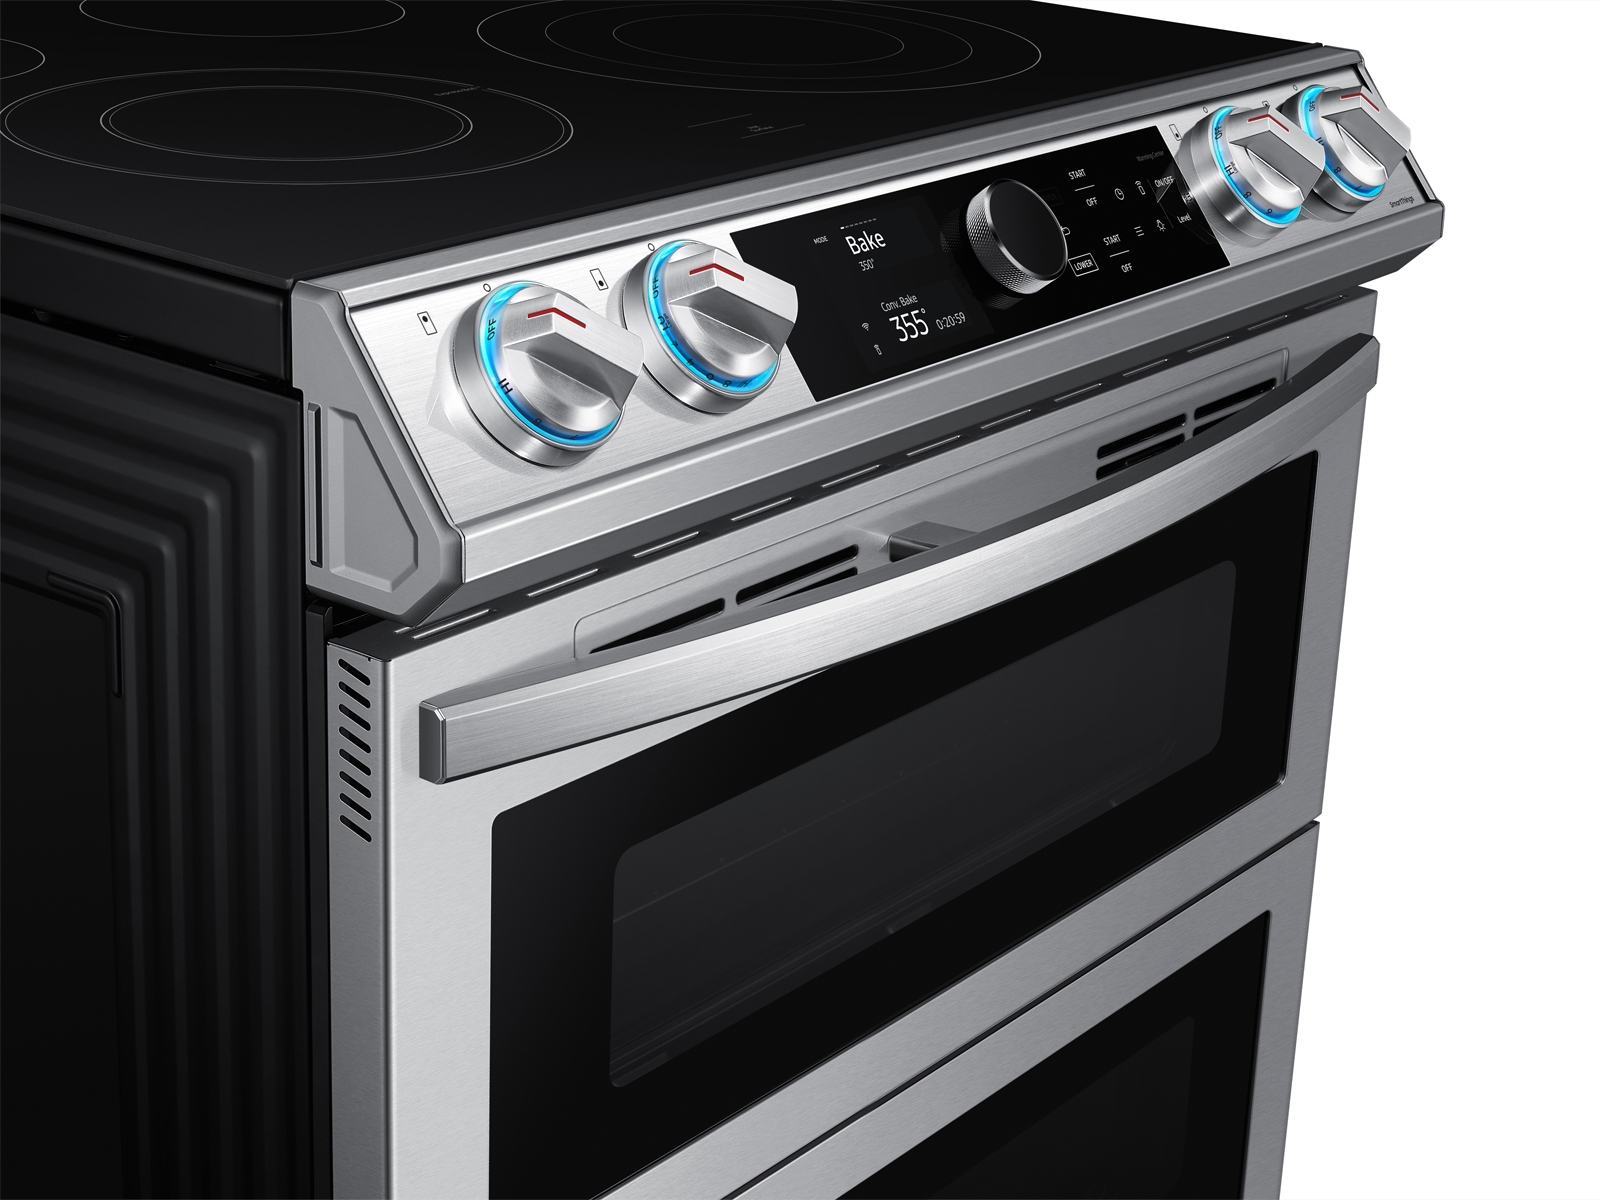 NE63T8751SG by Samsung - 6.3 cu ft. Smart Slide-in Electric Range with  Smart Dial, Air Fry, & Flex Duo™ in Black Stainless Steel